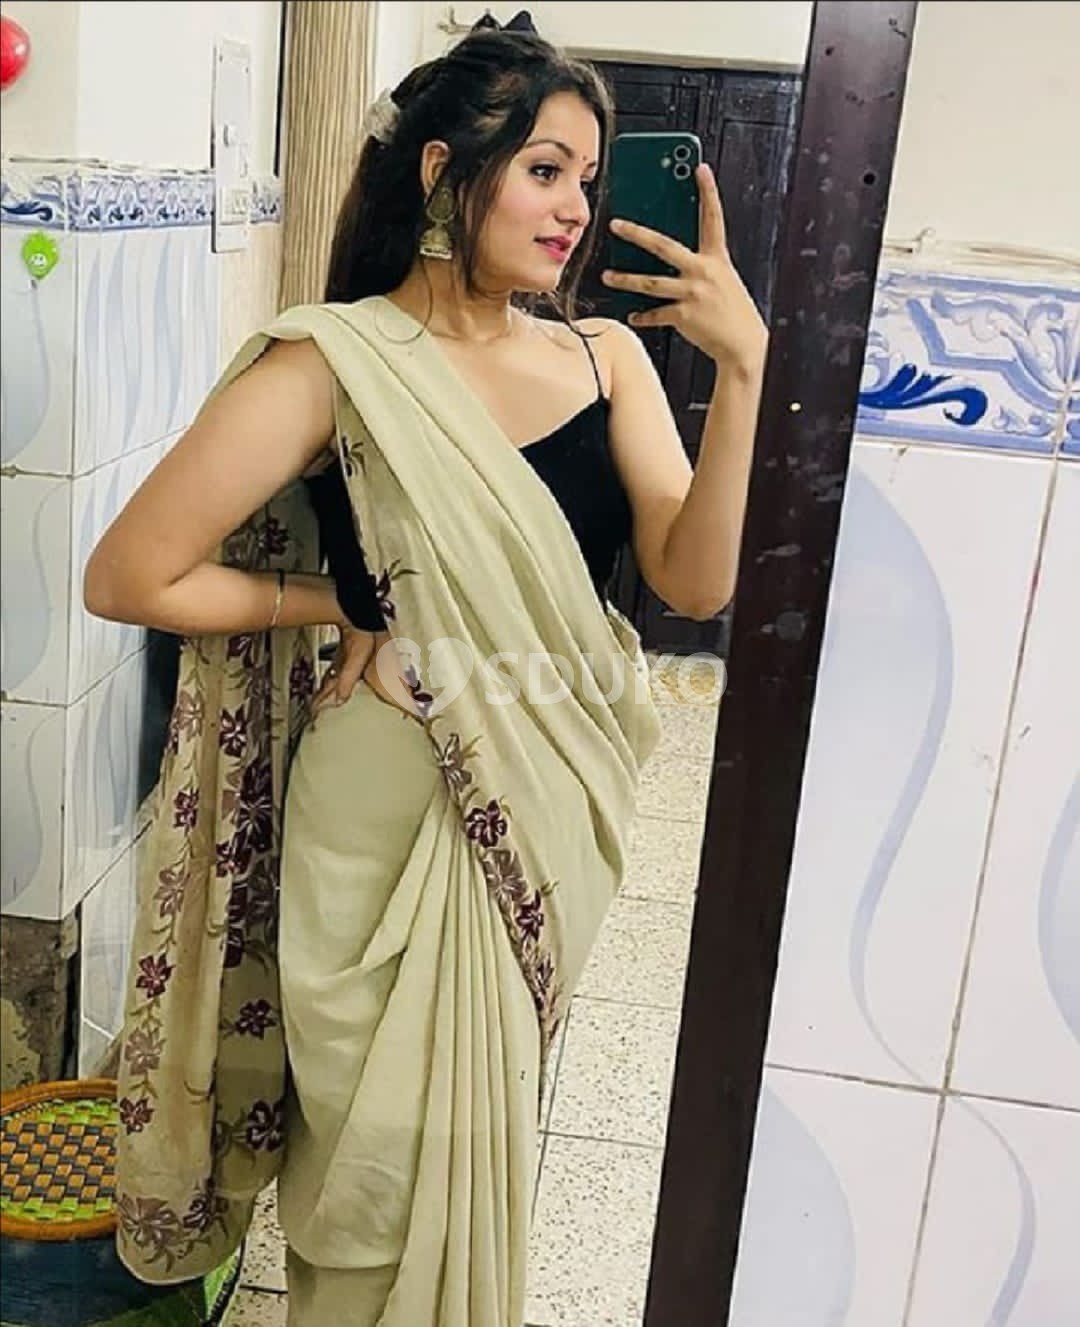 Indira nagar Full satisfied independent call Girl 24 hours available rr..